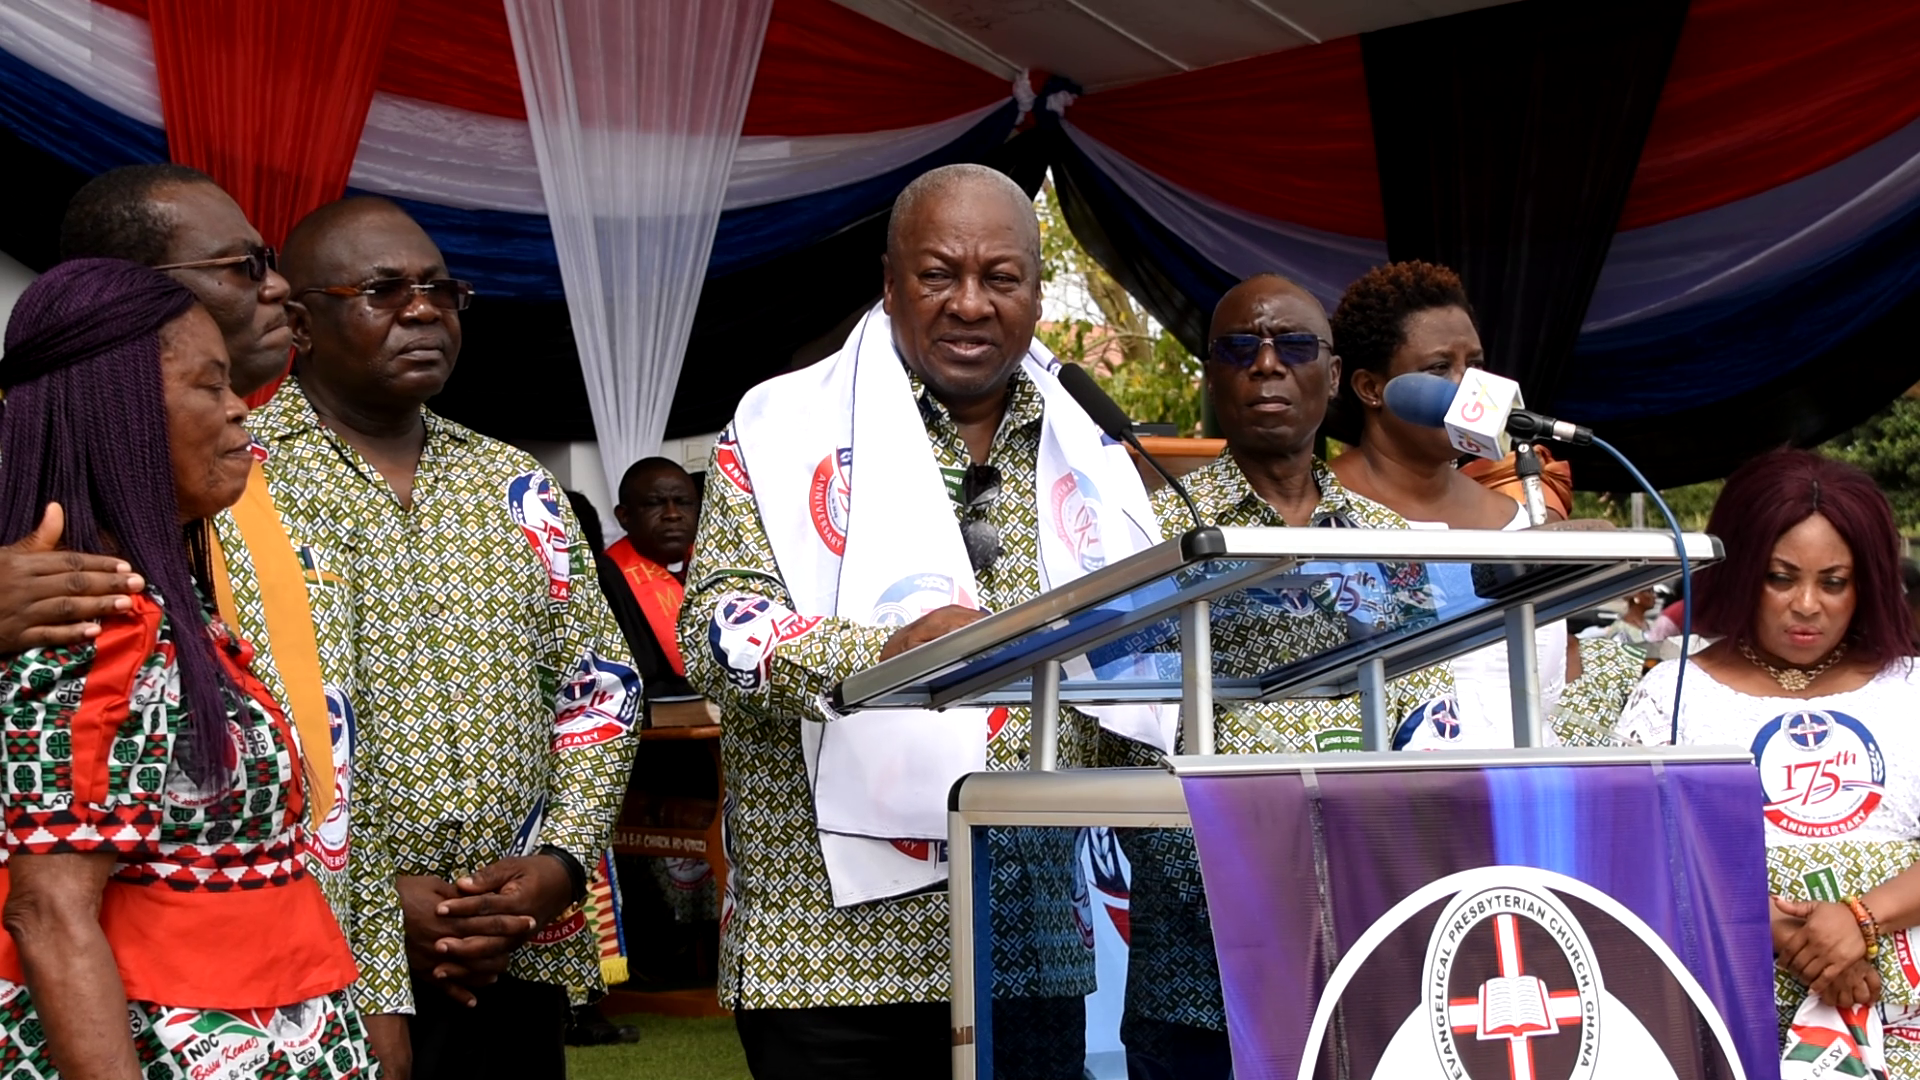 Economic hardship has affected how much people pay for offering - Mahama